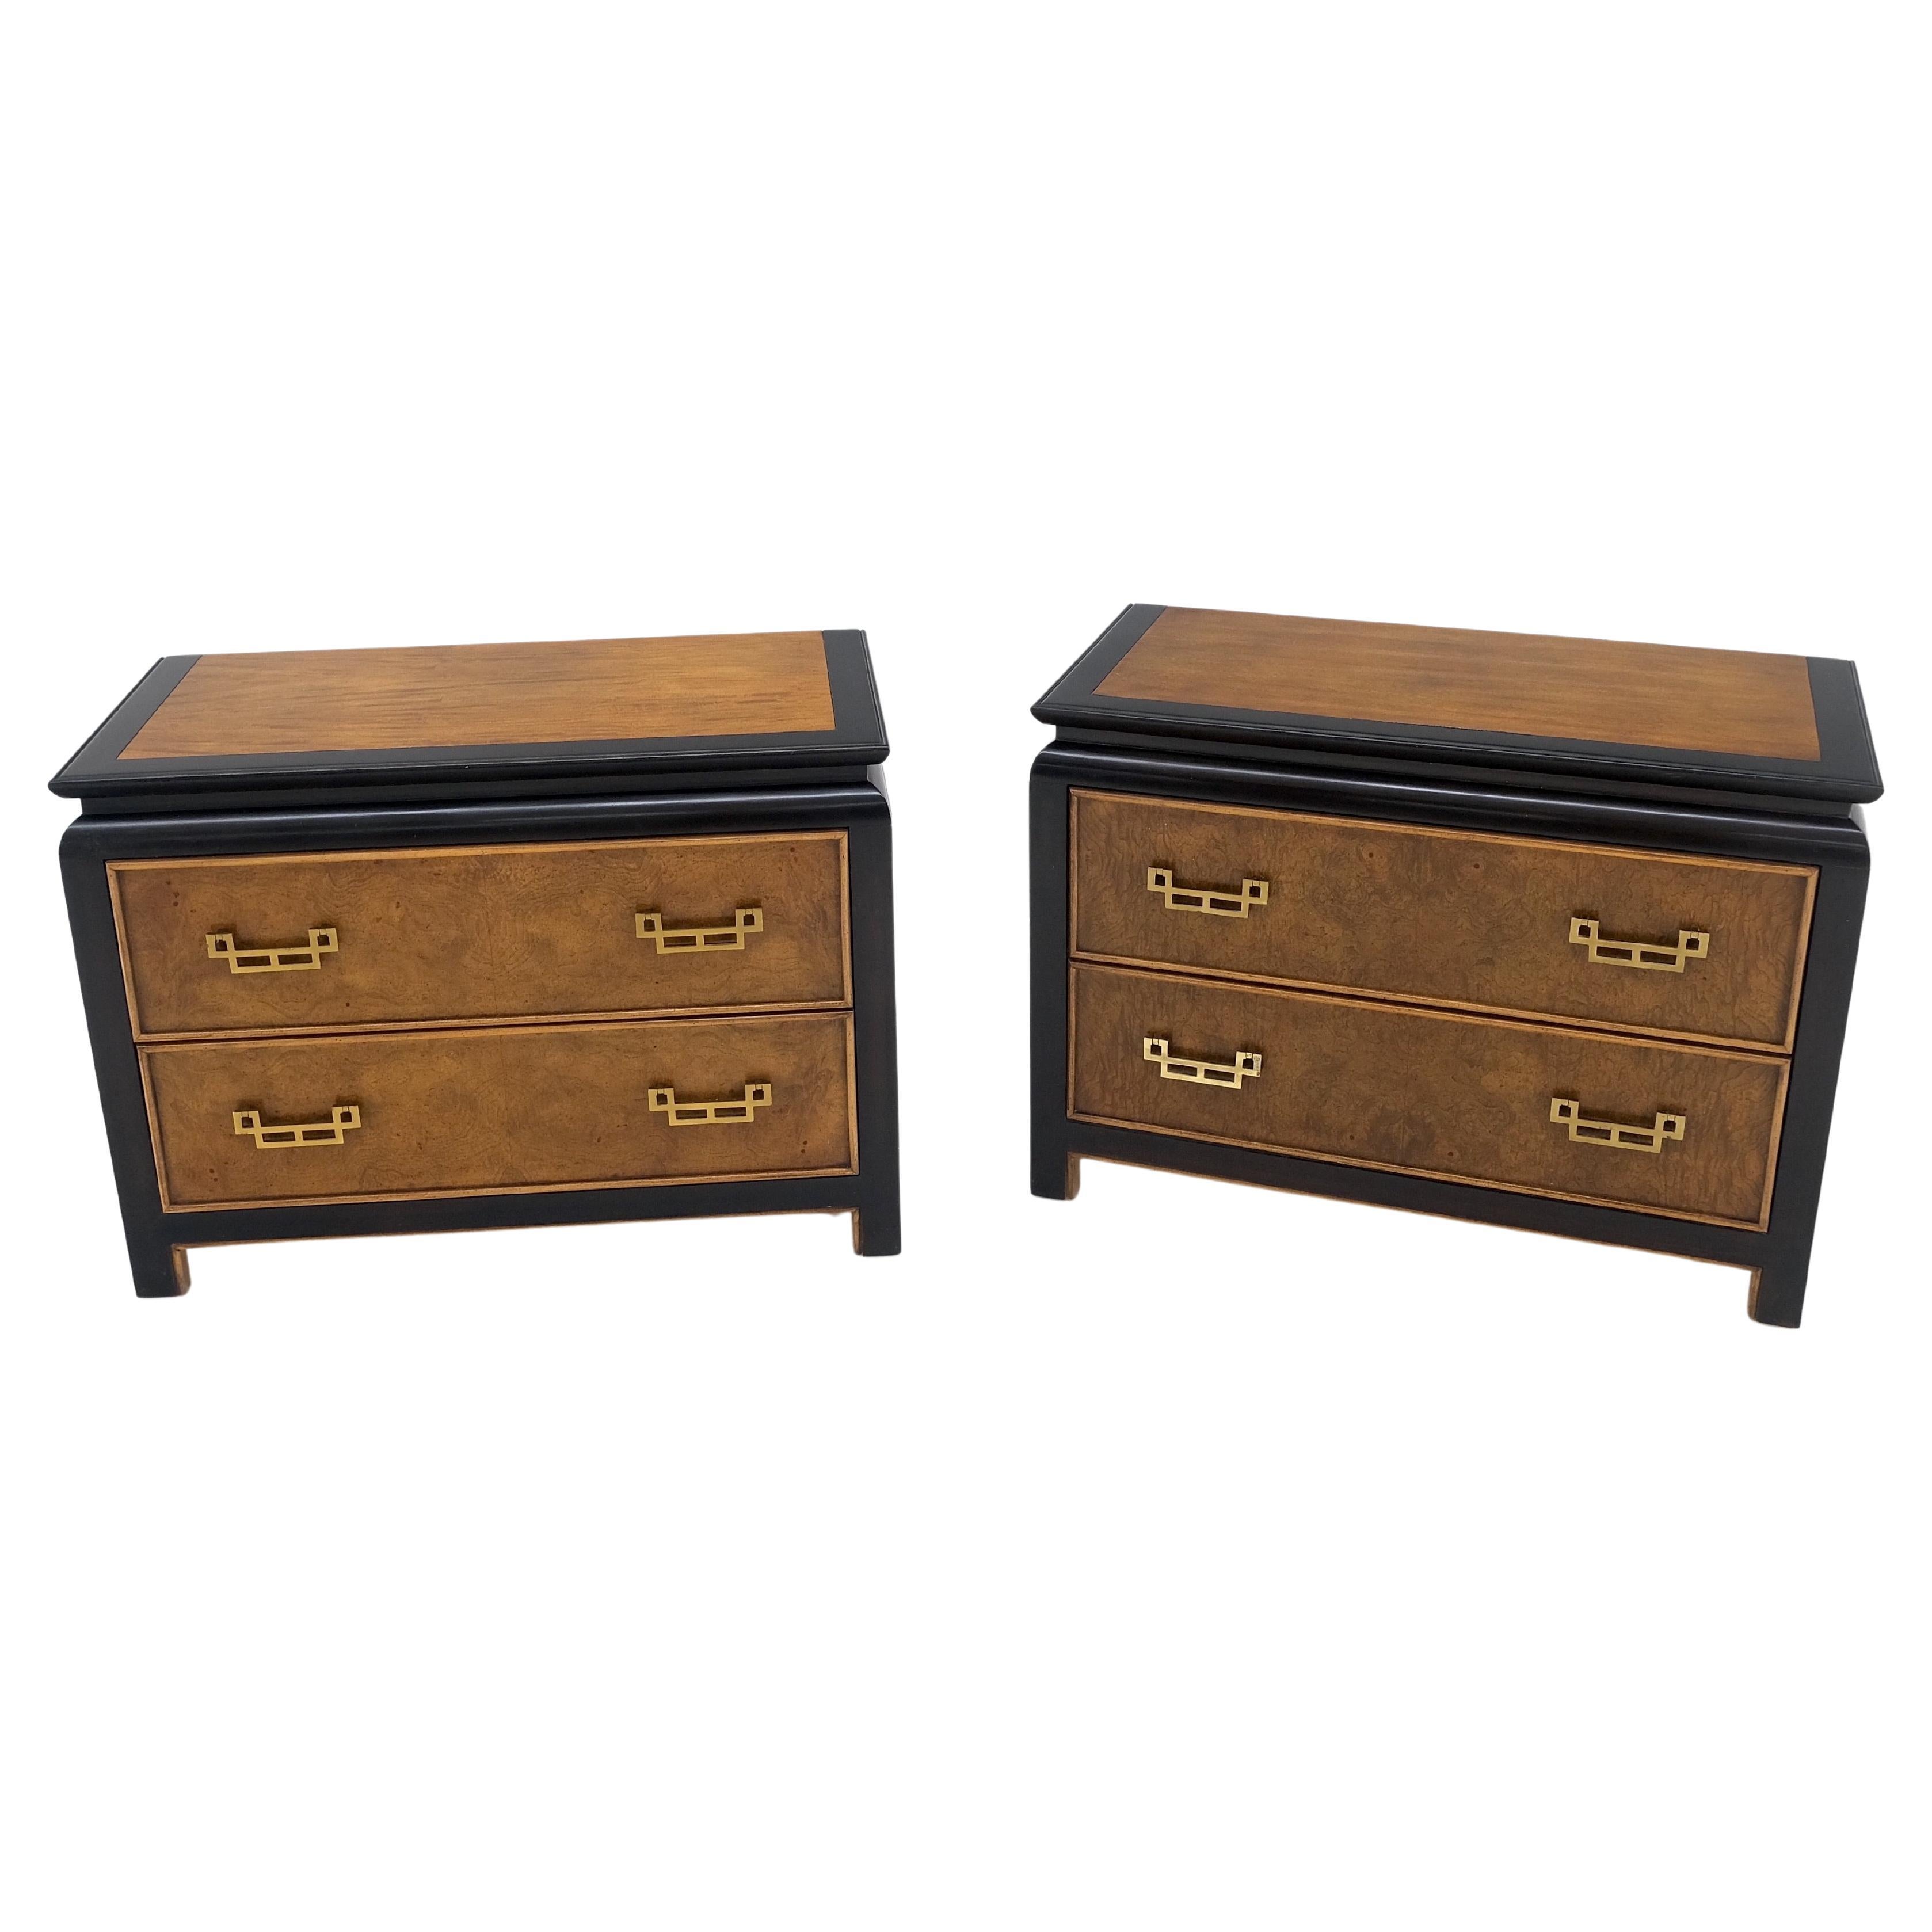 Pair Burl Wood Black Lacquer Solid Brass Drop Pull 2 Drawer Night Stands MINT!